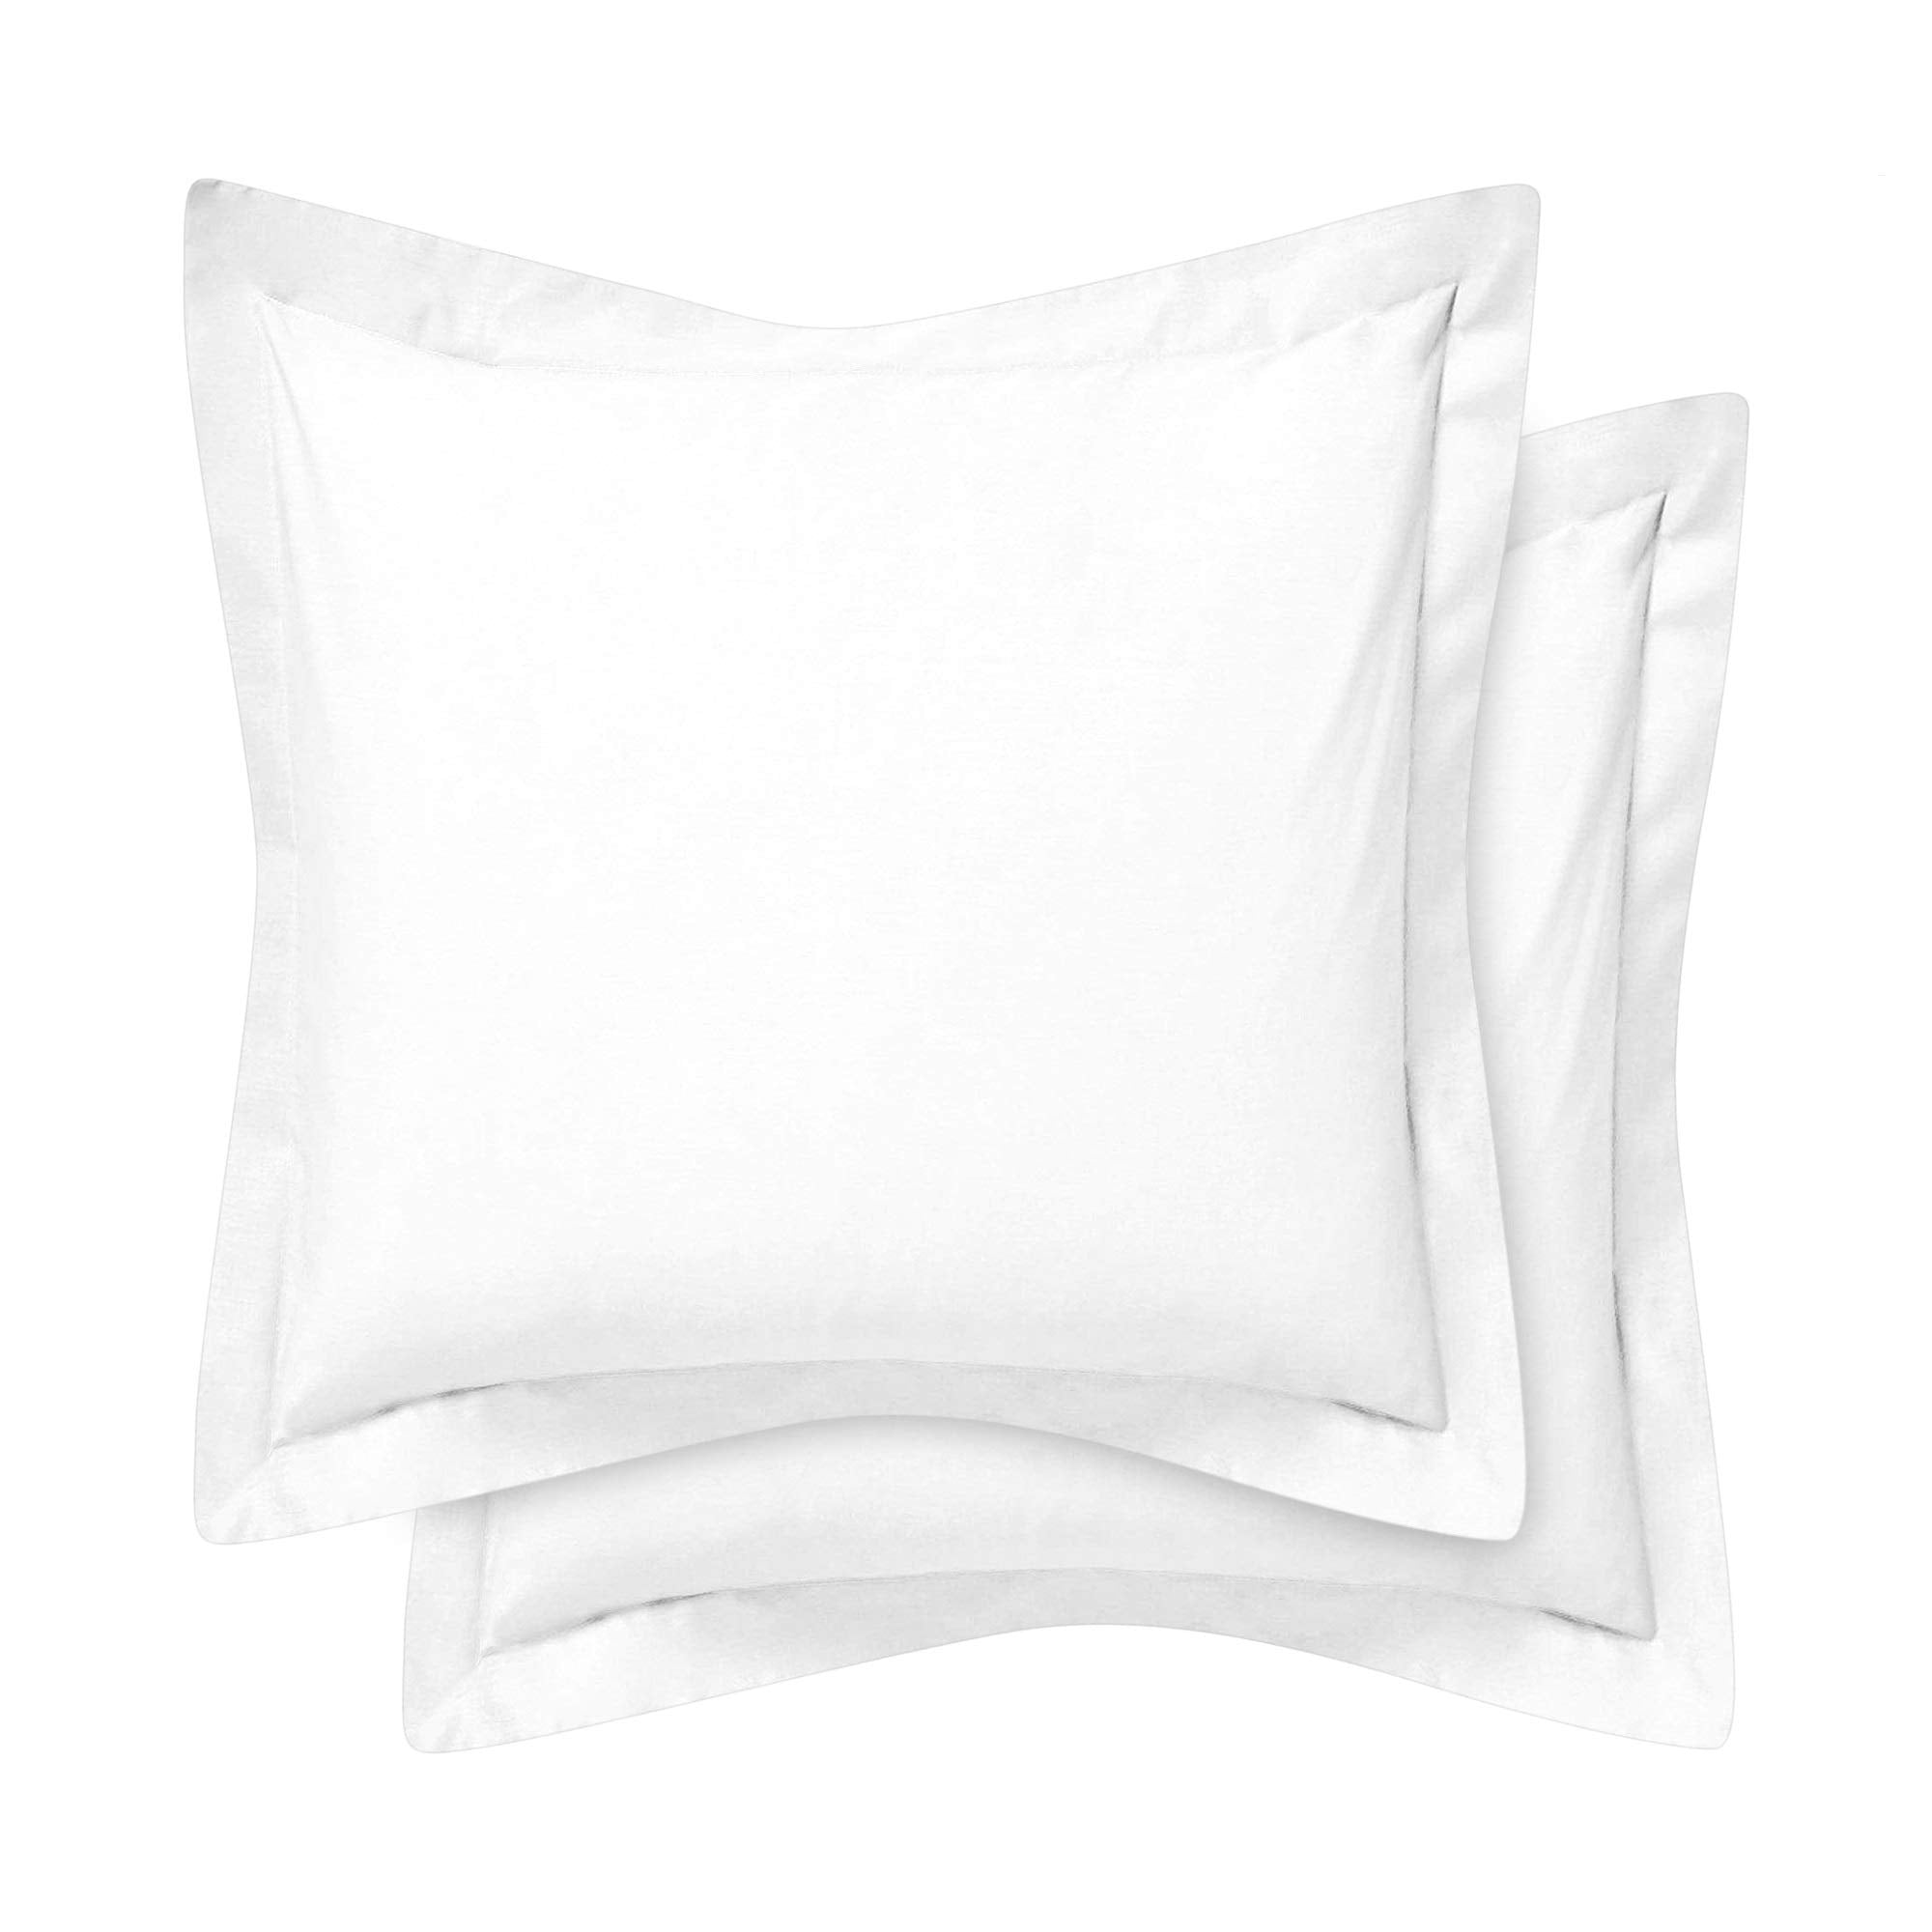 Comfort Beddings Heavy Quality 400 Thread Count 100% Egyptian Cotton Continental Pillow Cases Pack Of 2 - White (Continental/Square Size 65 x 65 CM)